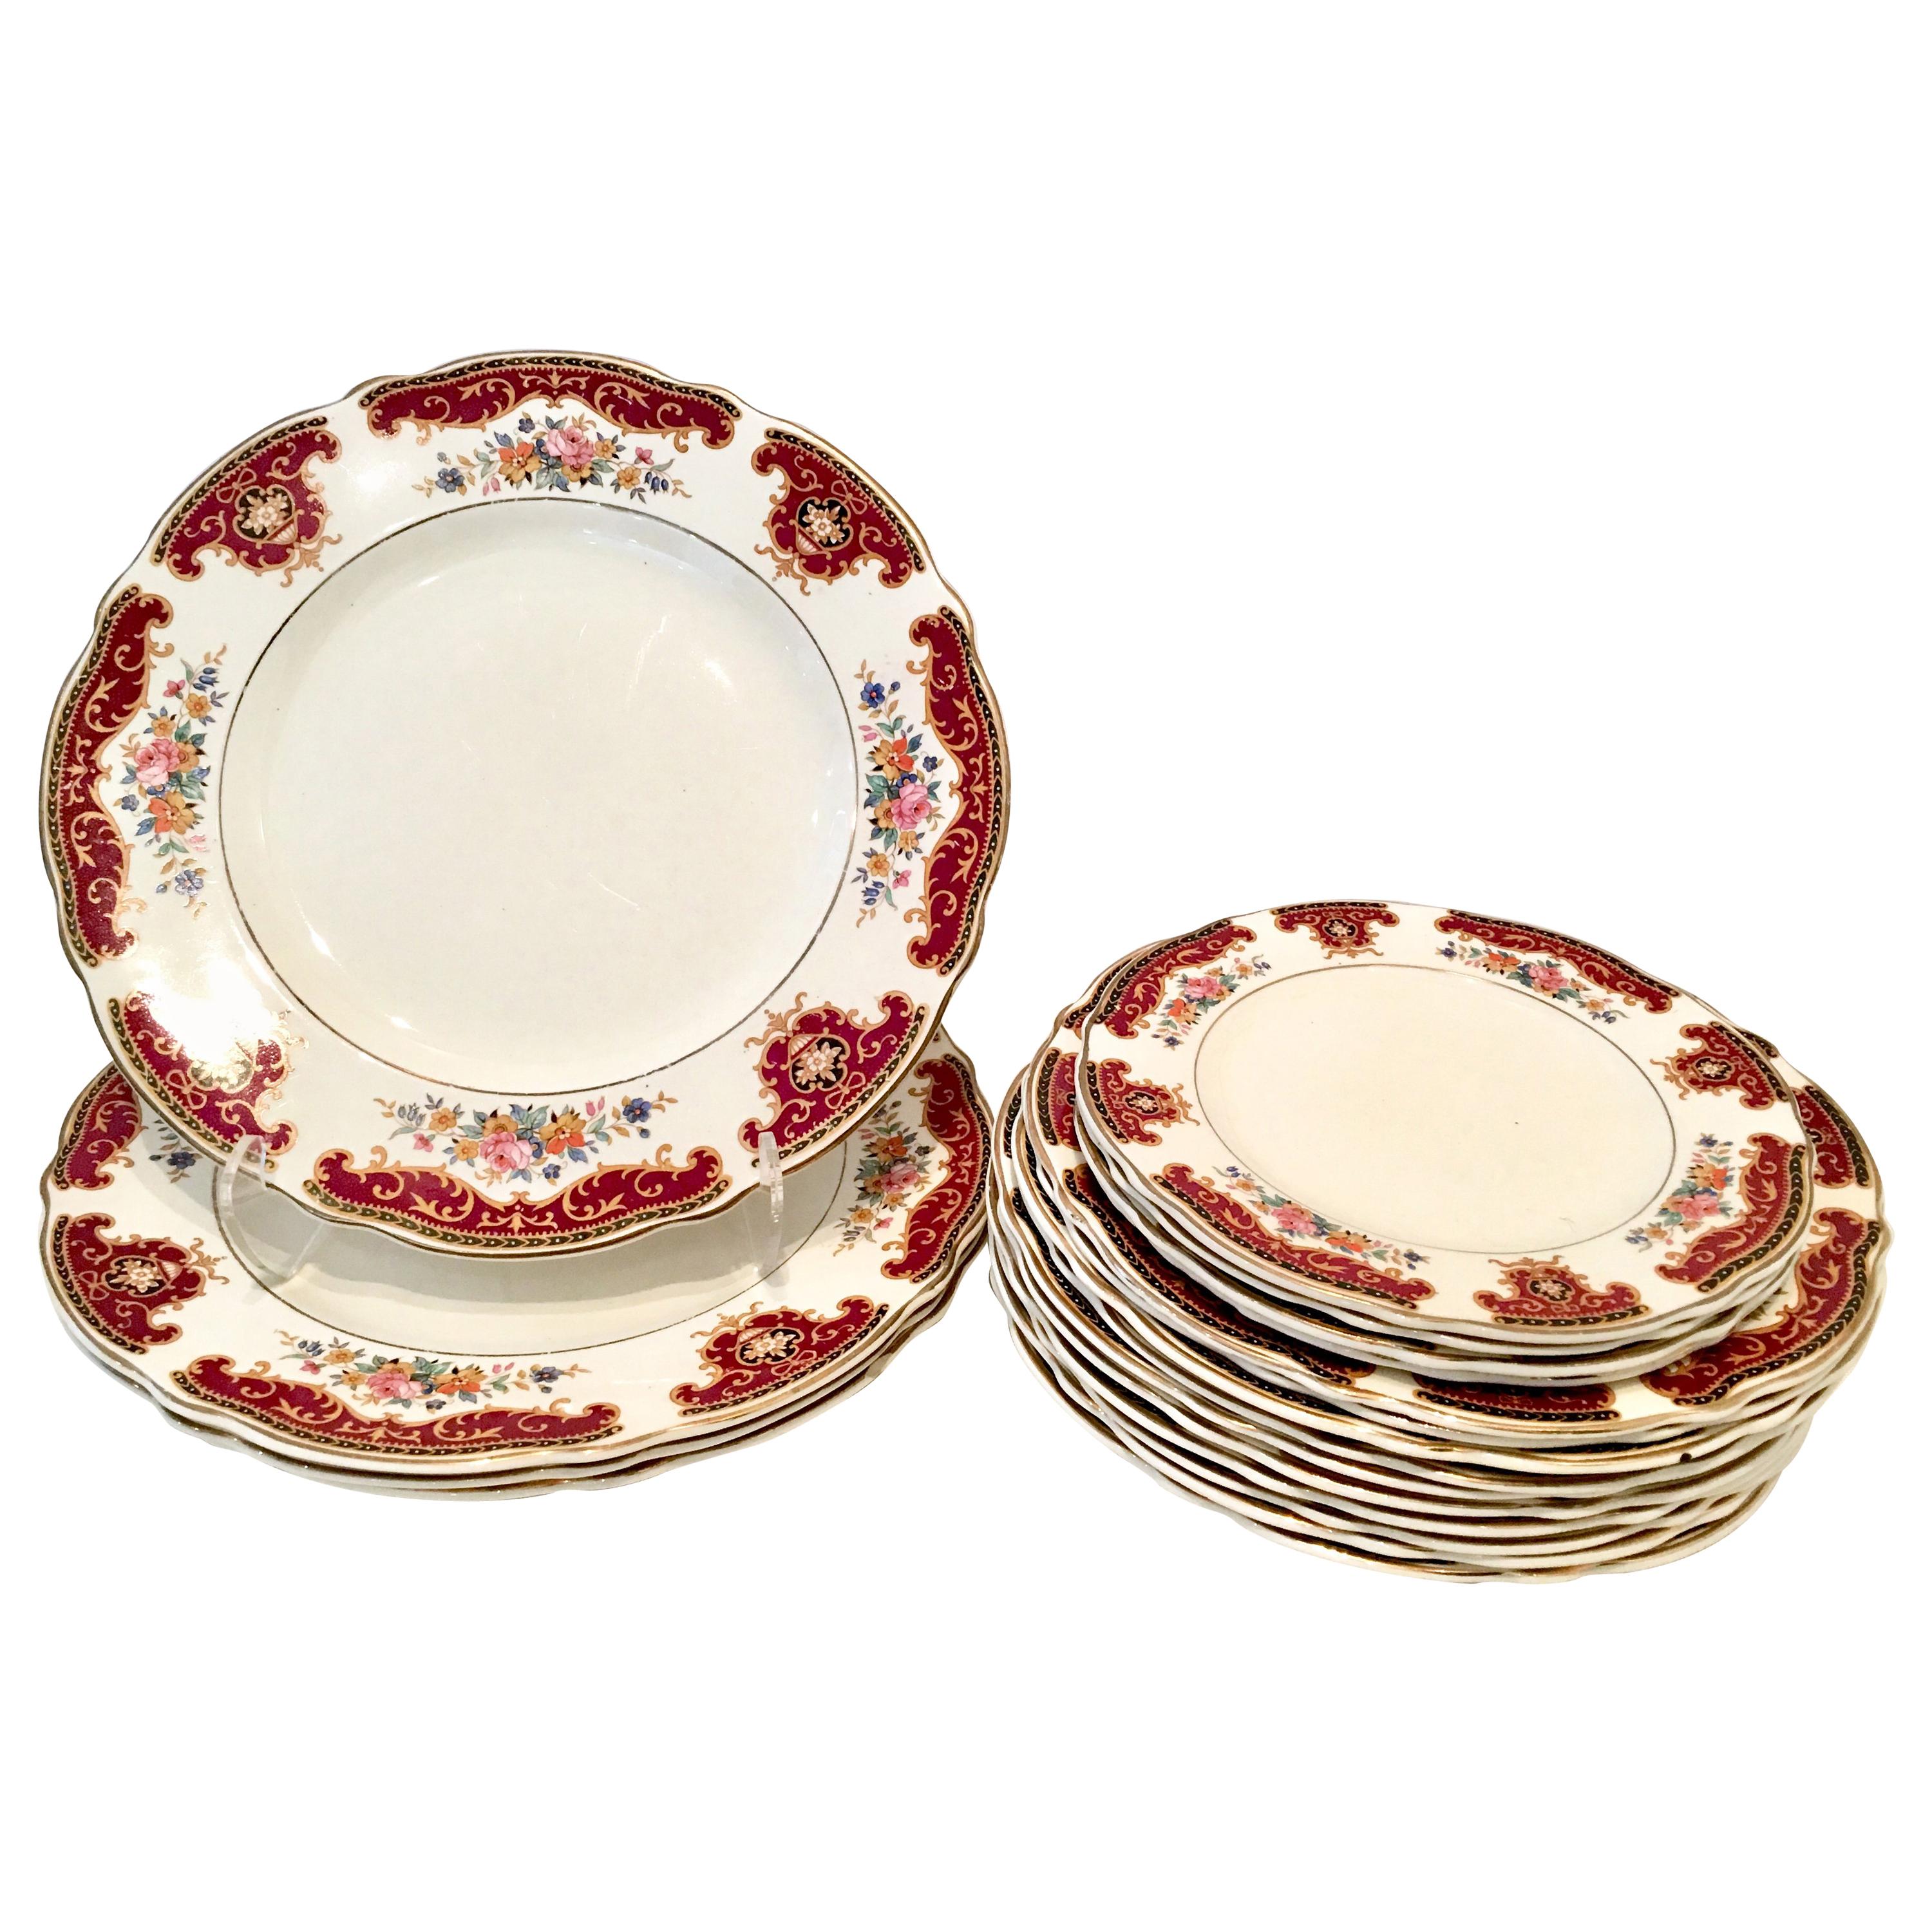 Antique Staffordshire Dinnerware S/18 Pieces by Thomas Hughes & Son